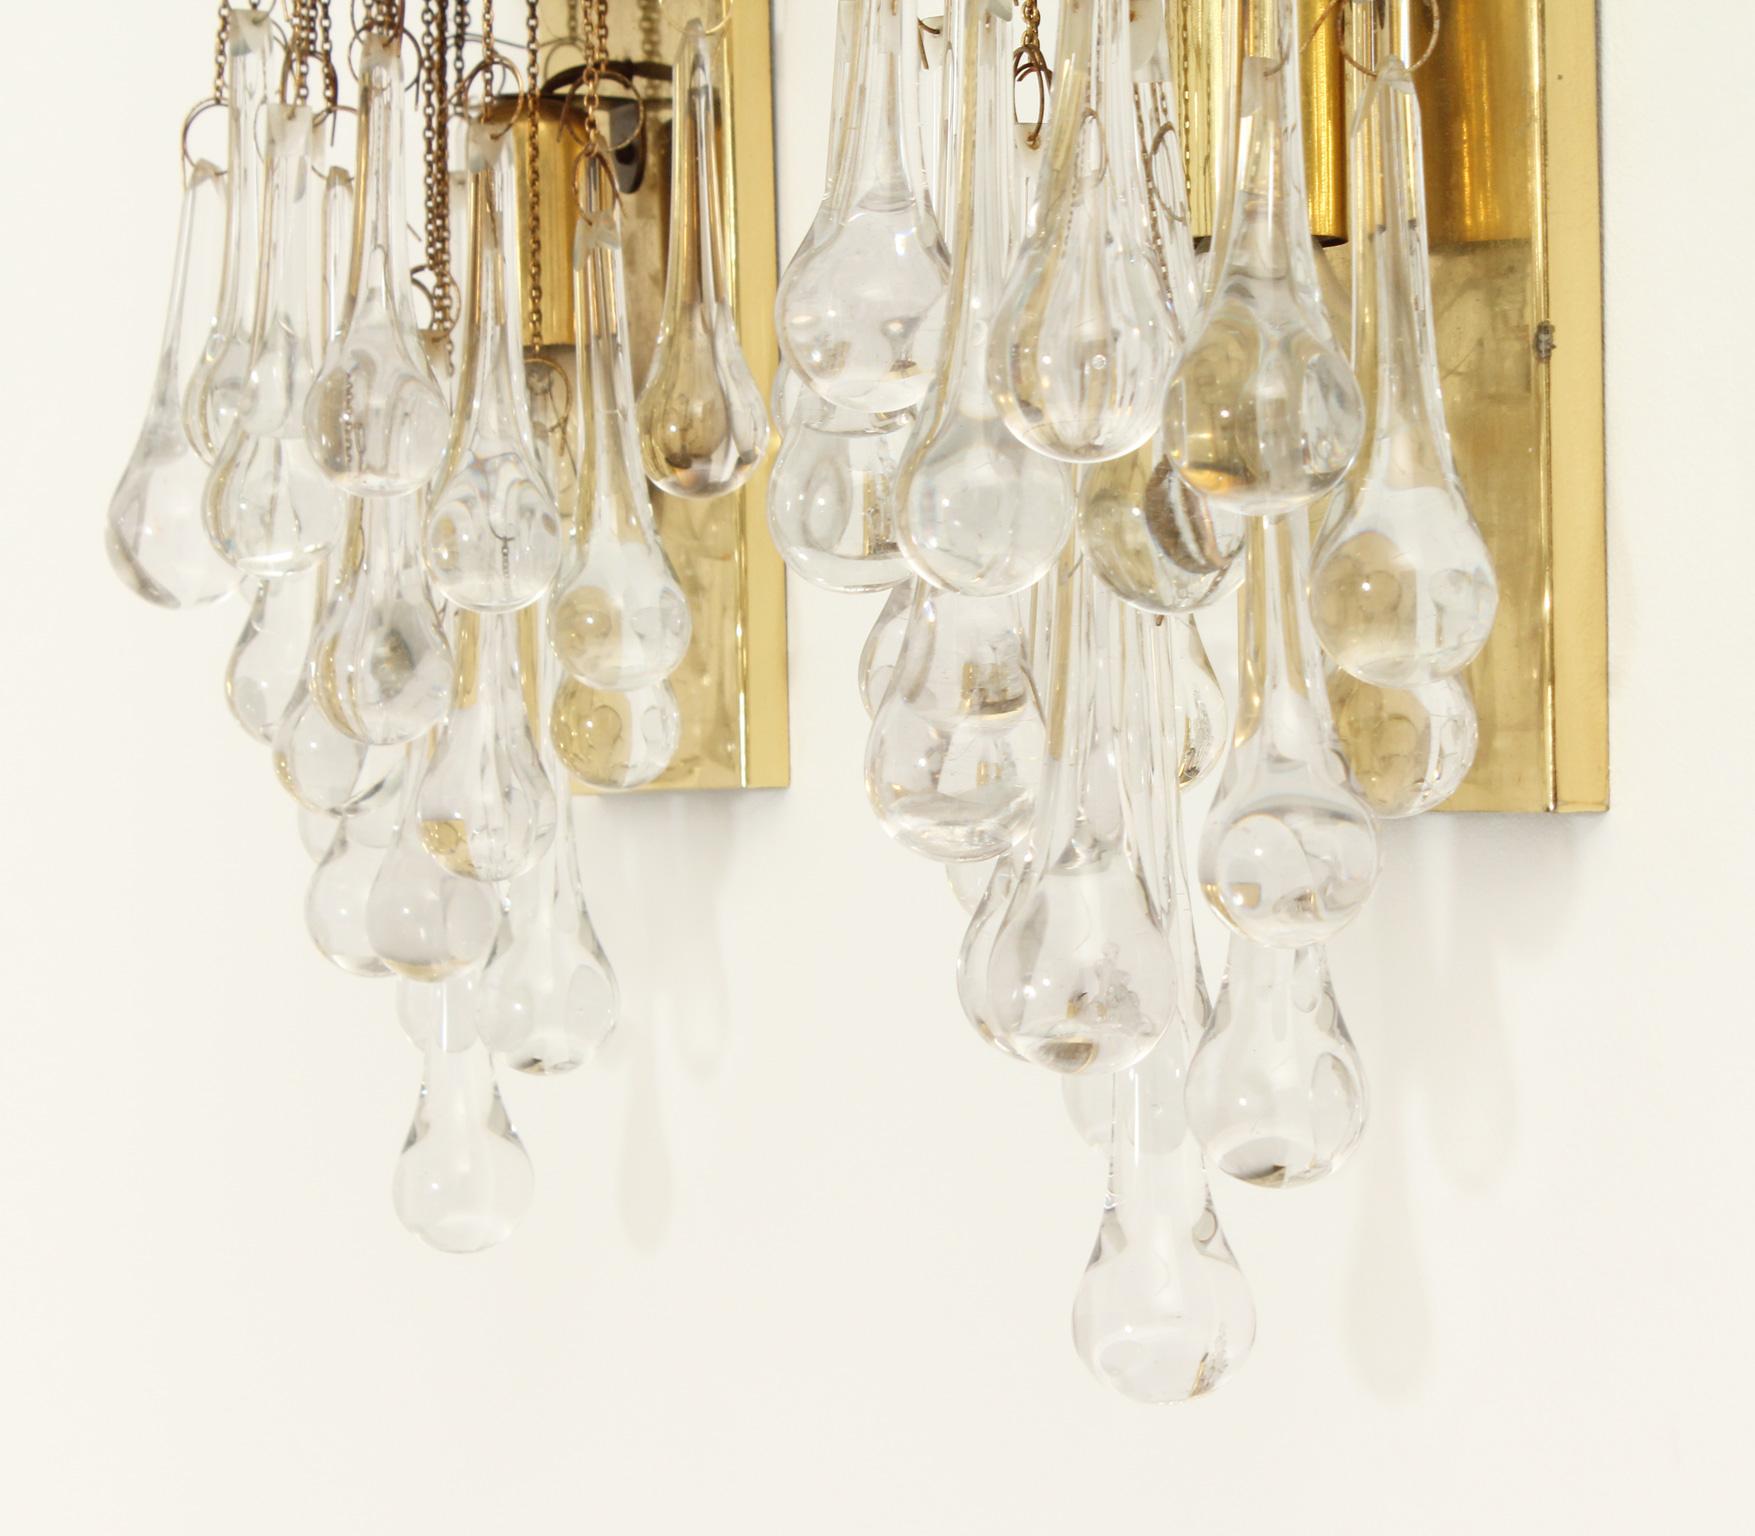 Pair of Brass and Glass Teardrop Sconces by Lumica, Spain, 1970's For Sale 2